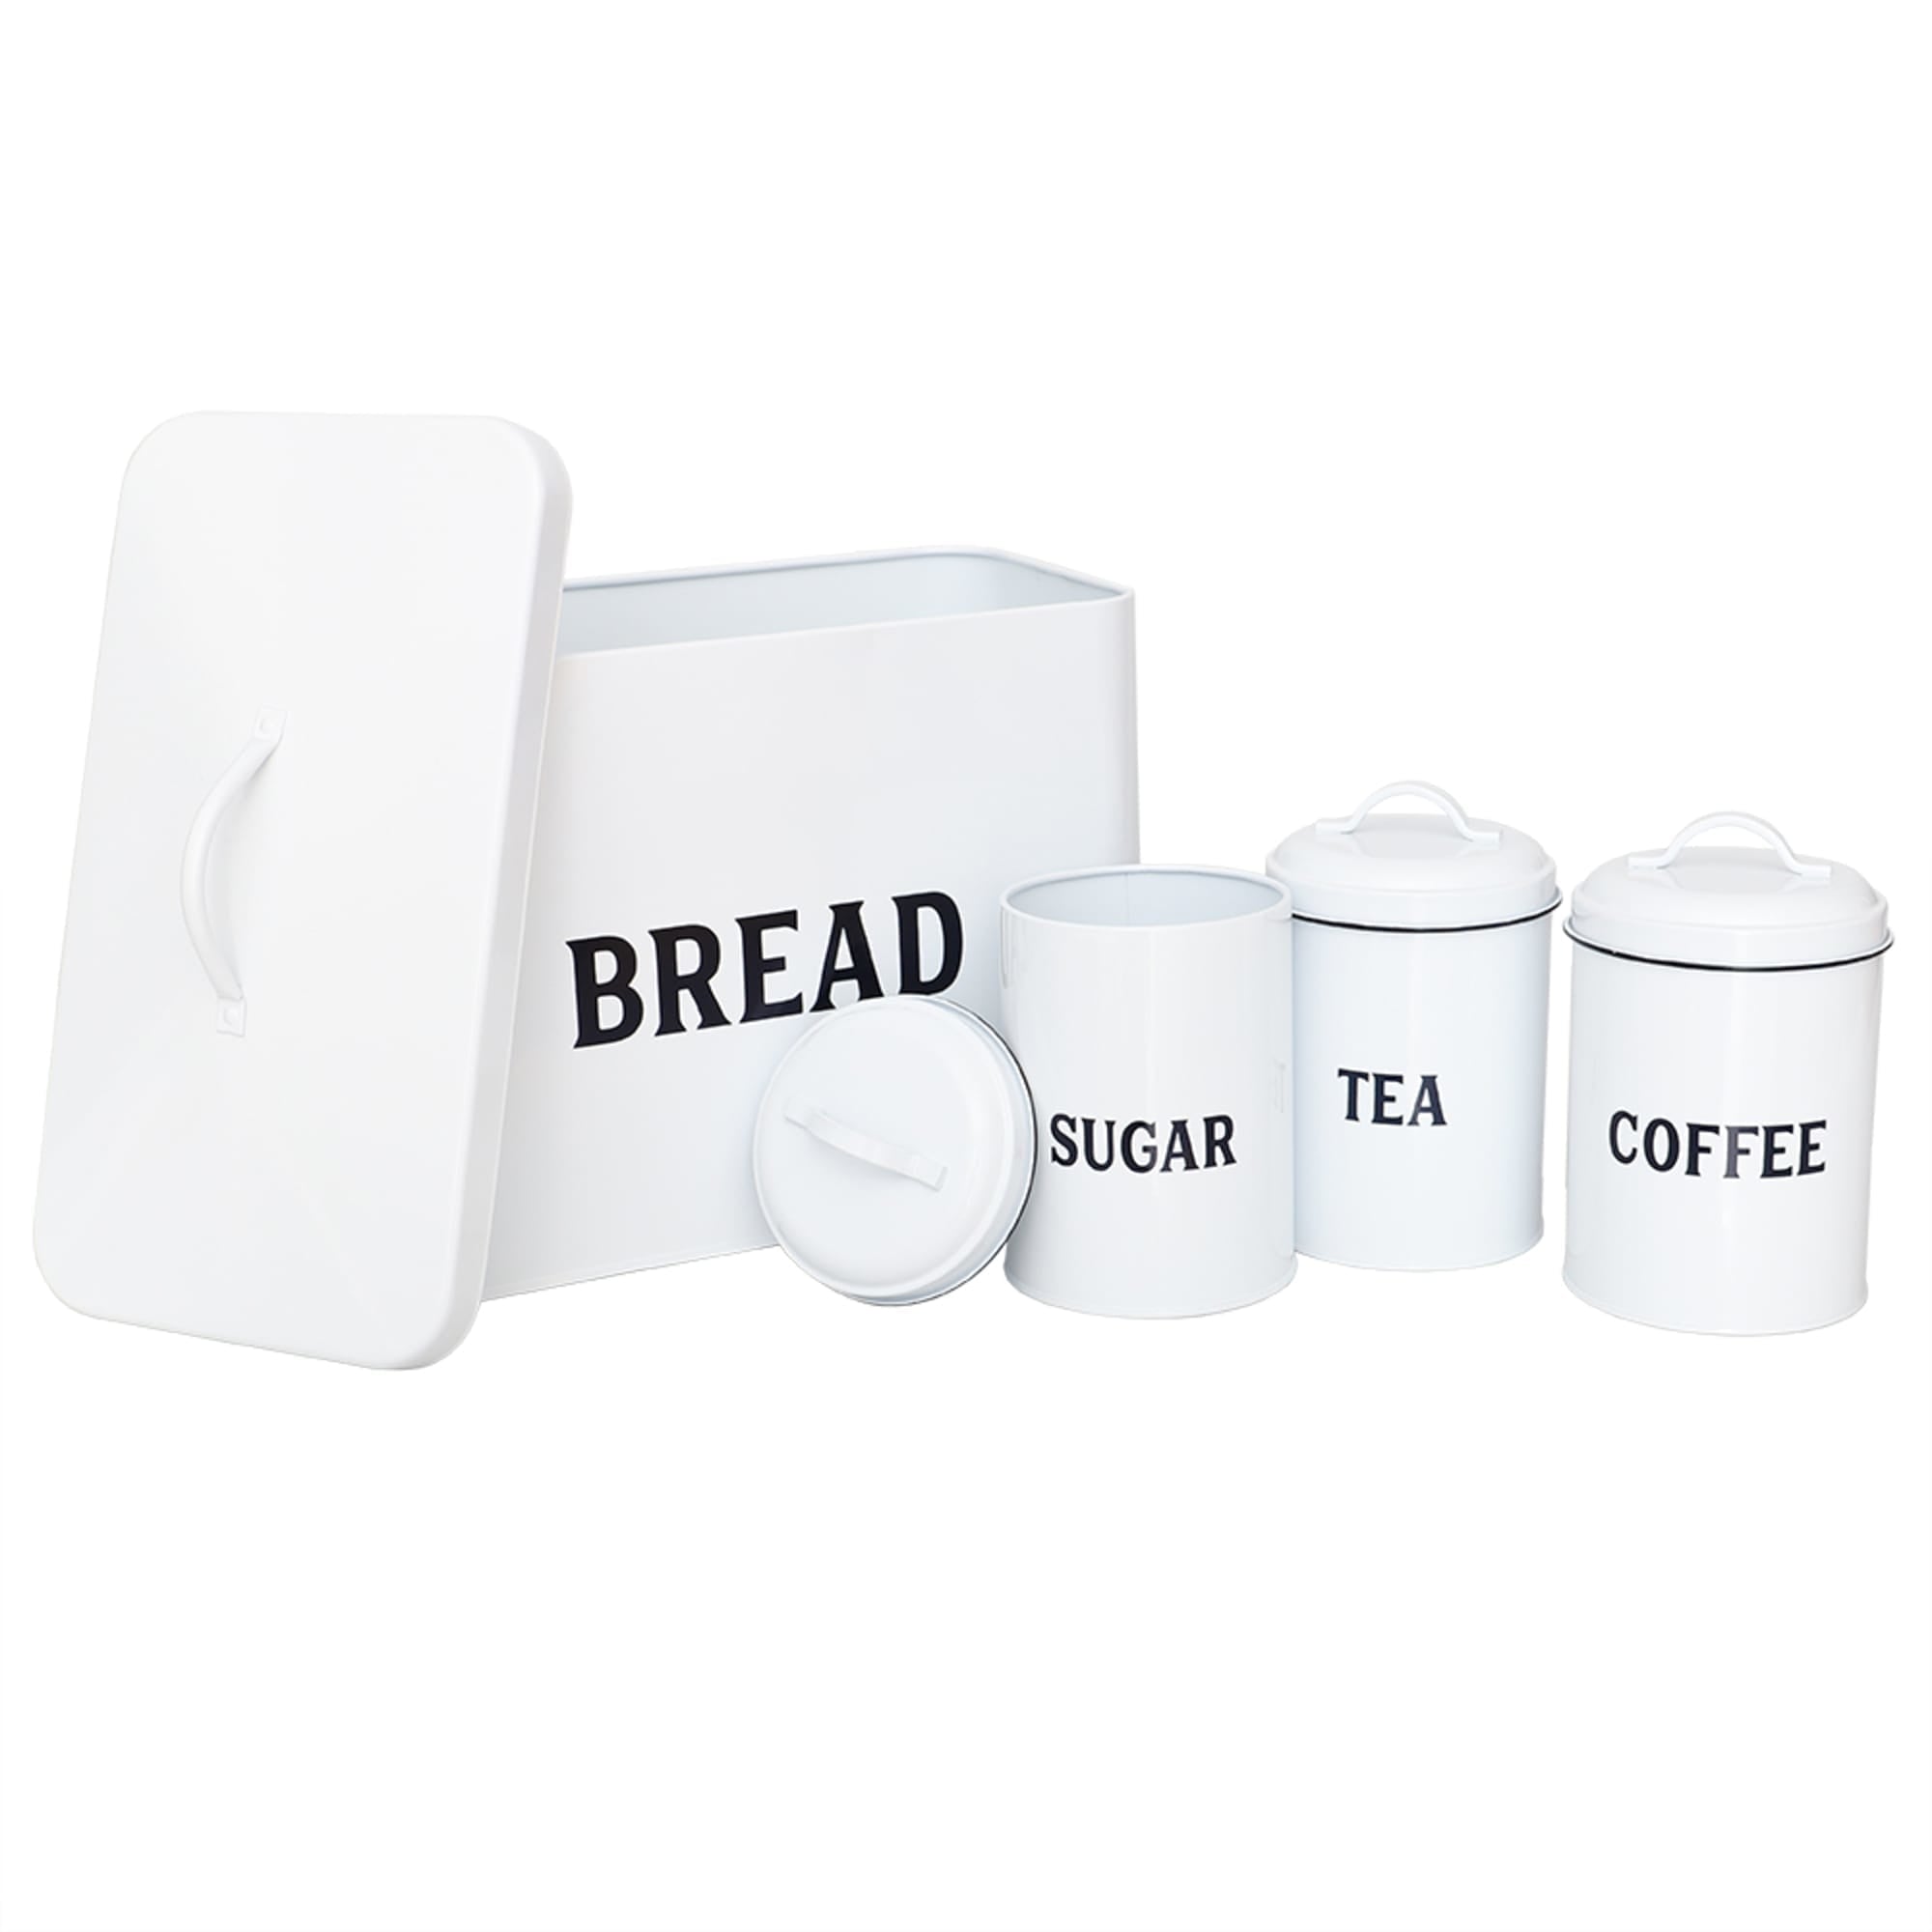 Home Basics Countryside 4 Piece Tin Counter Storage, White $20.00 EACH, CASE PACK OF 4